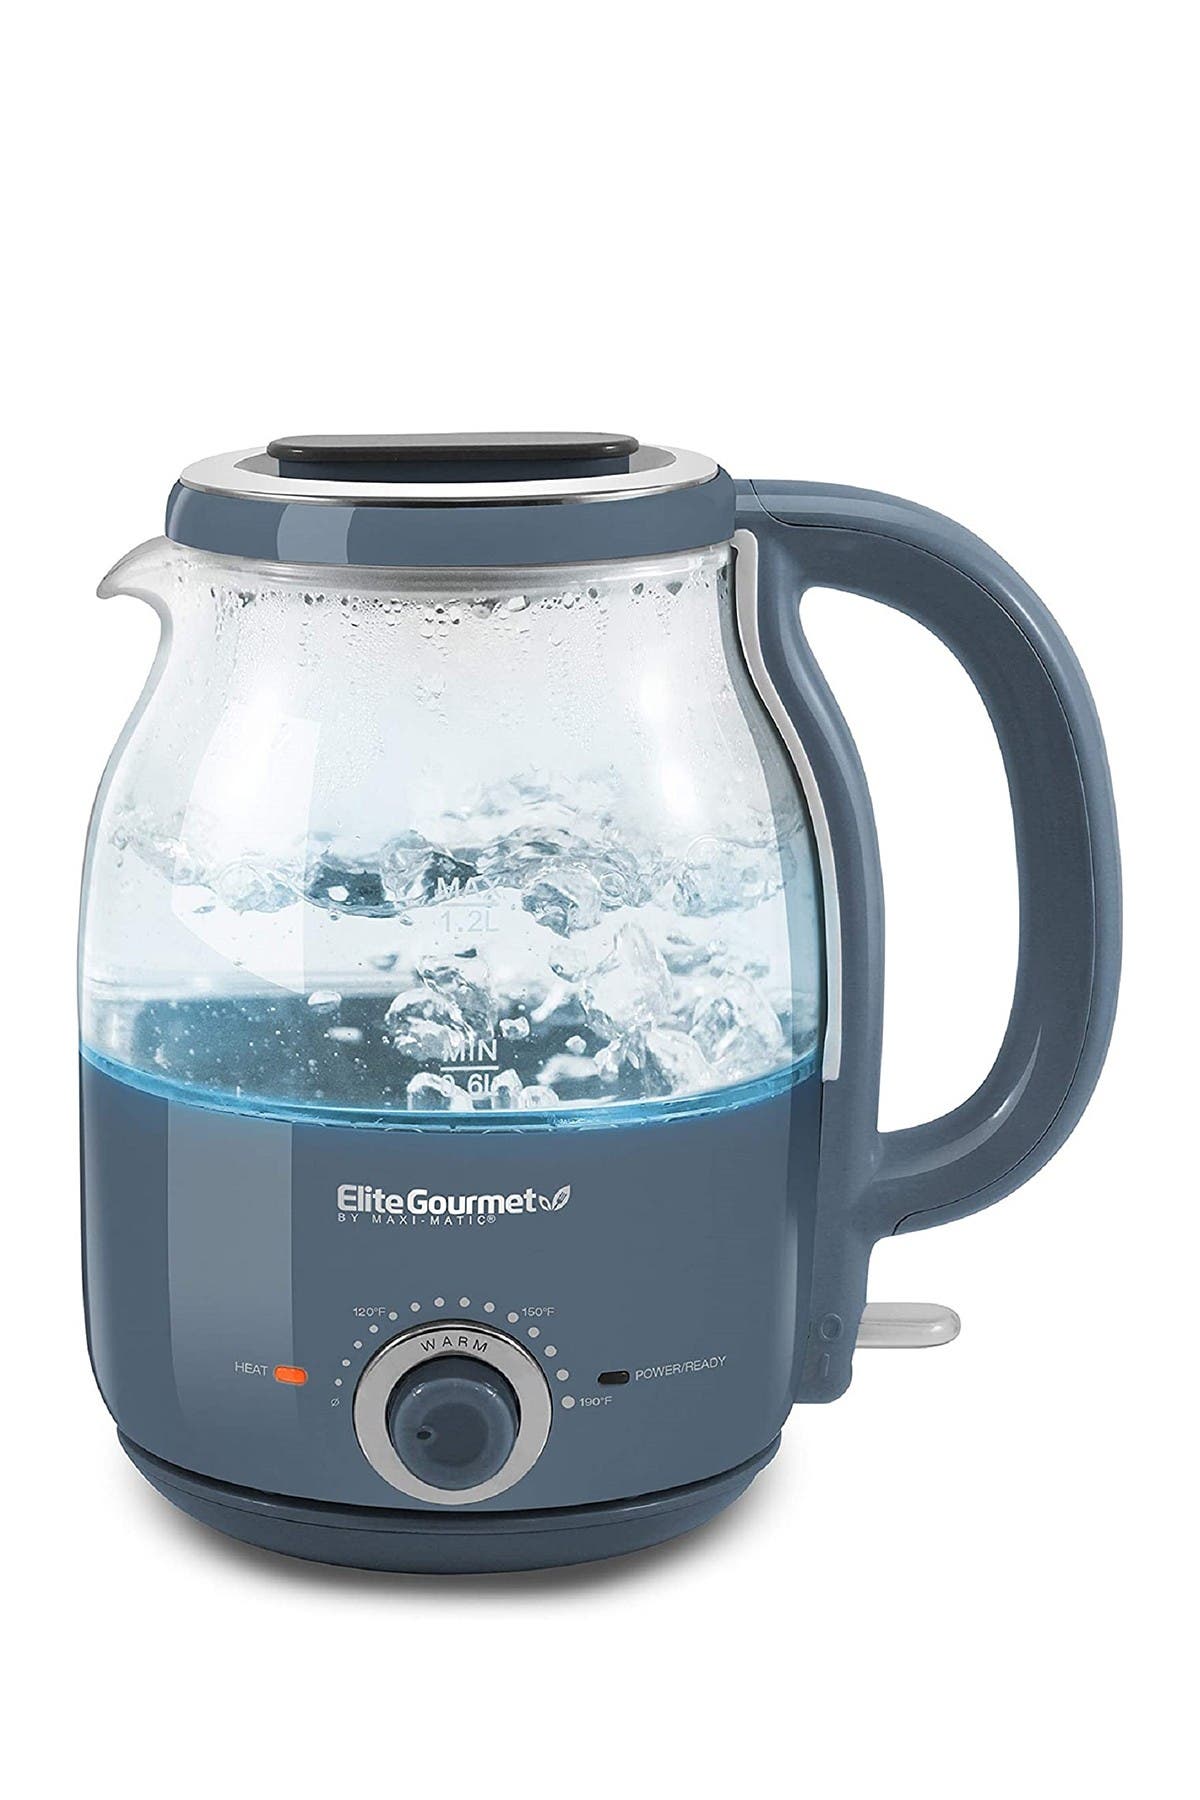 Maxi-matic Elite Gourmet 1.2l Adjustable Temperature Electric Glass Kettle In Slate Blue